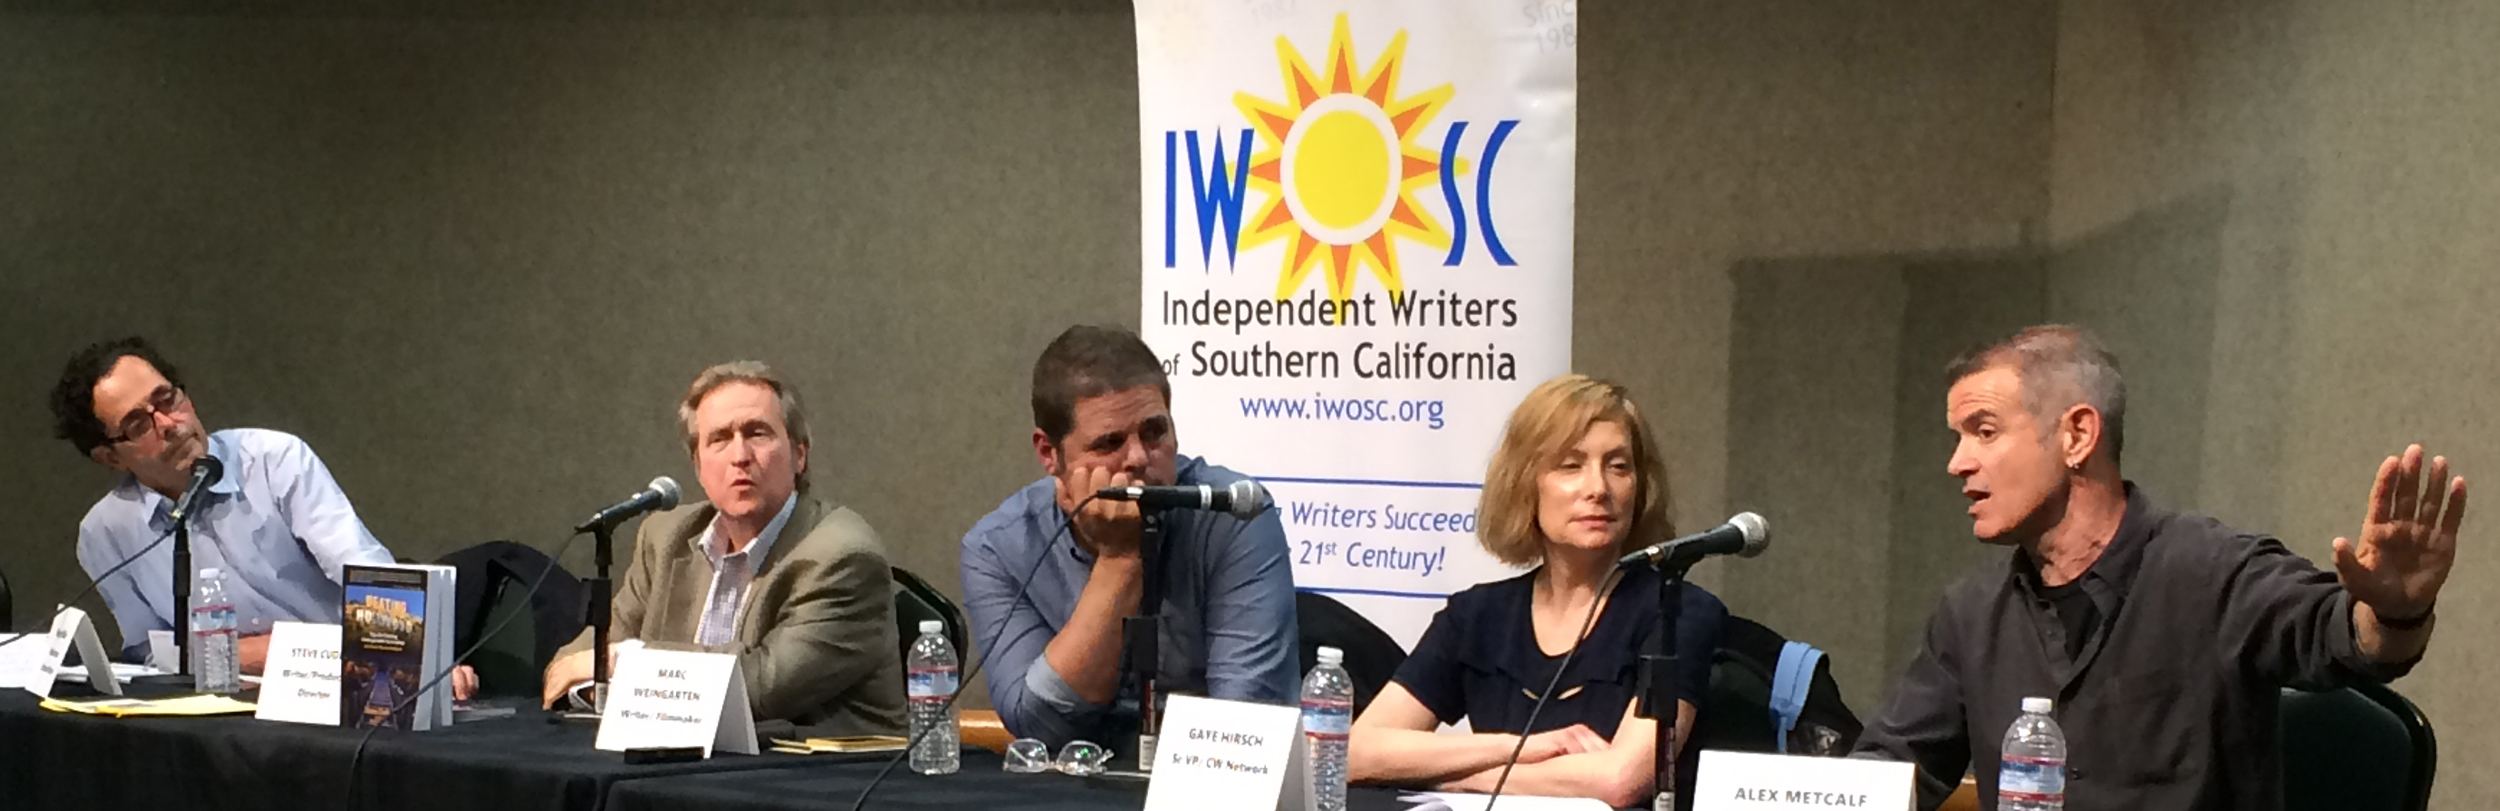 IWOSC panel on writing for TV